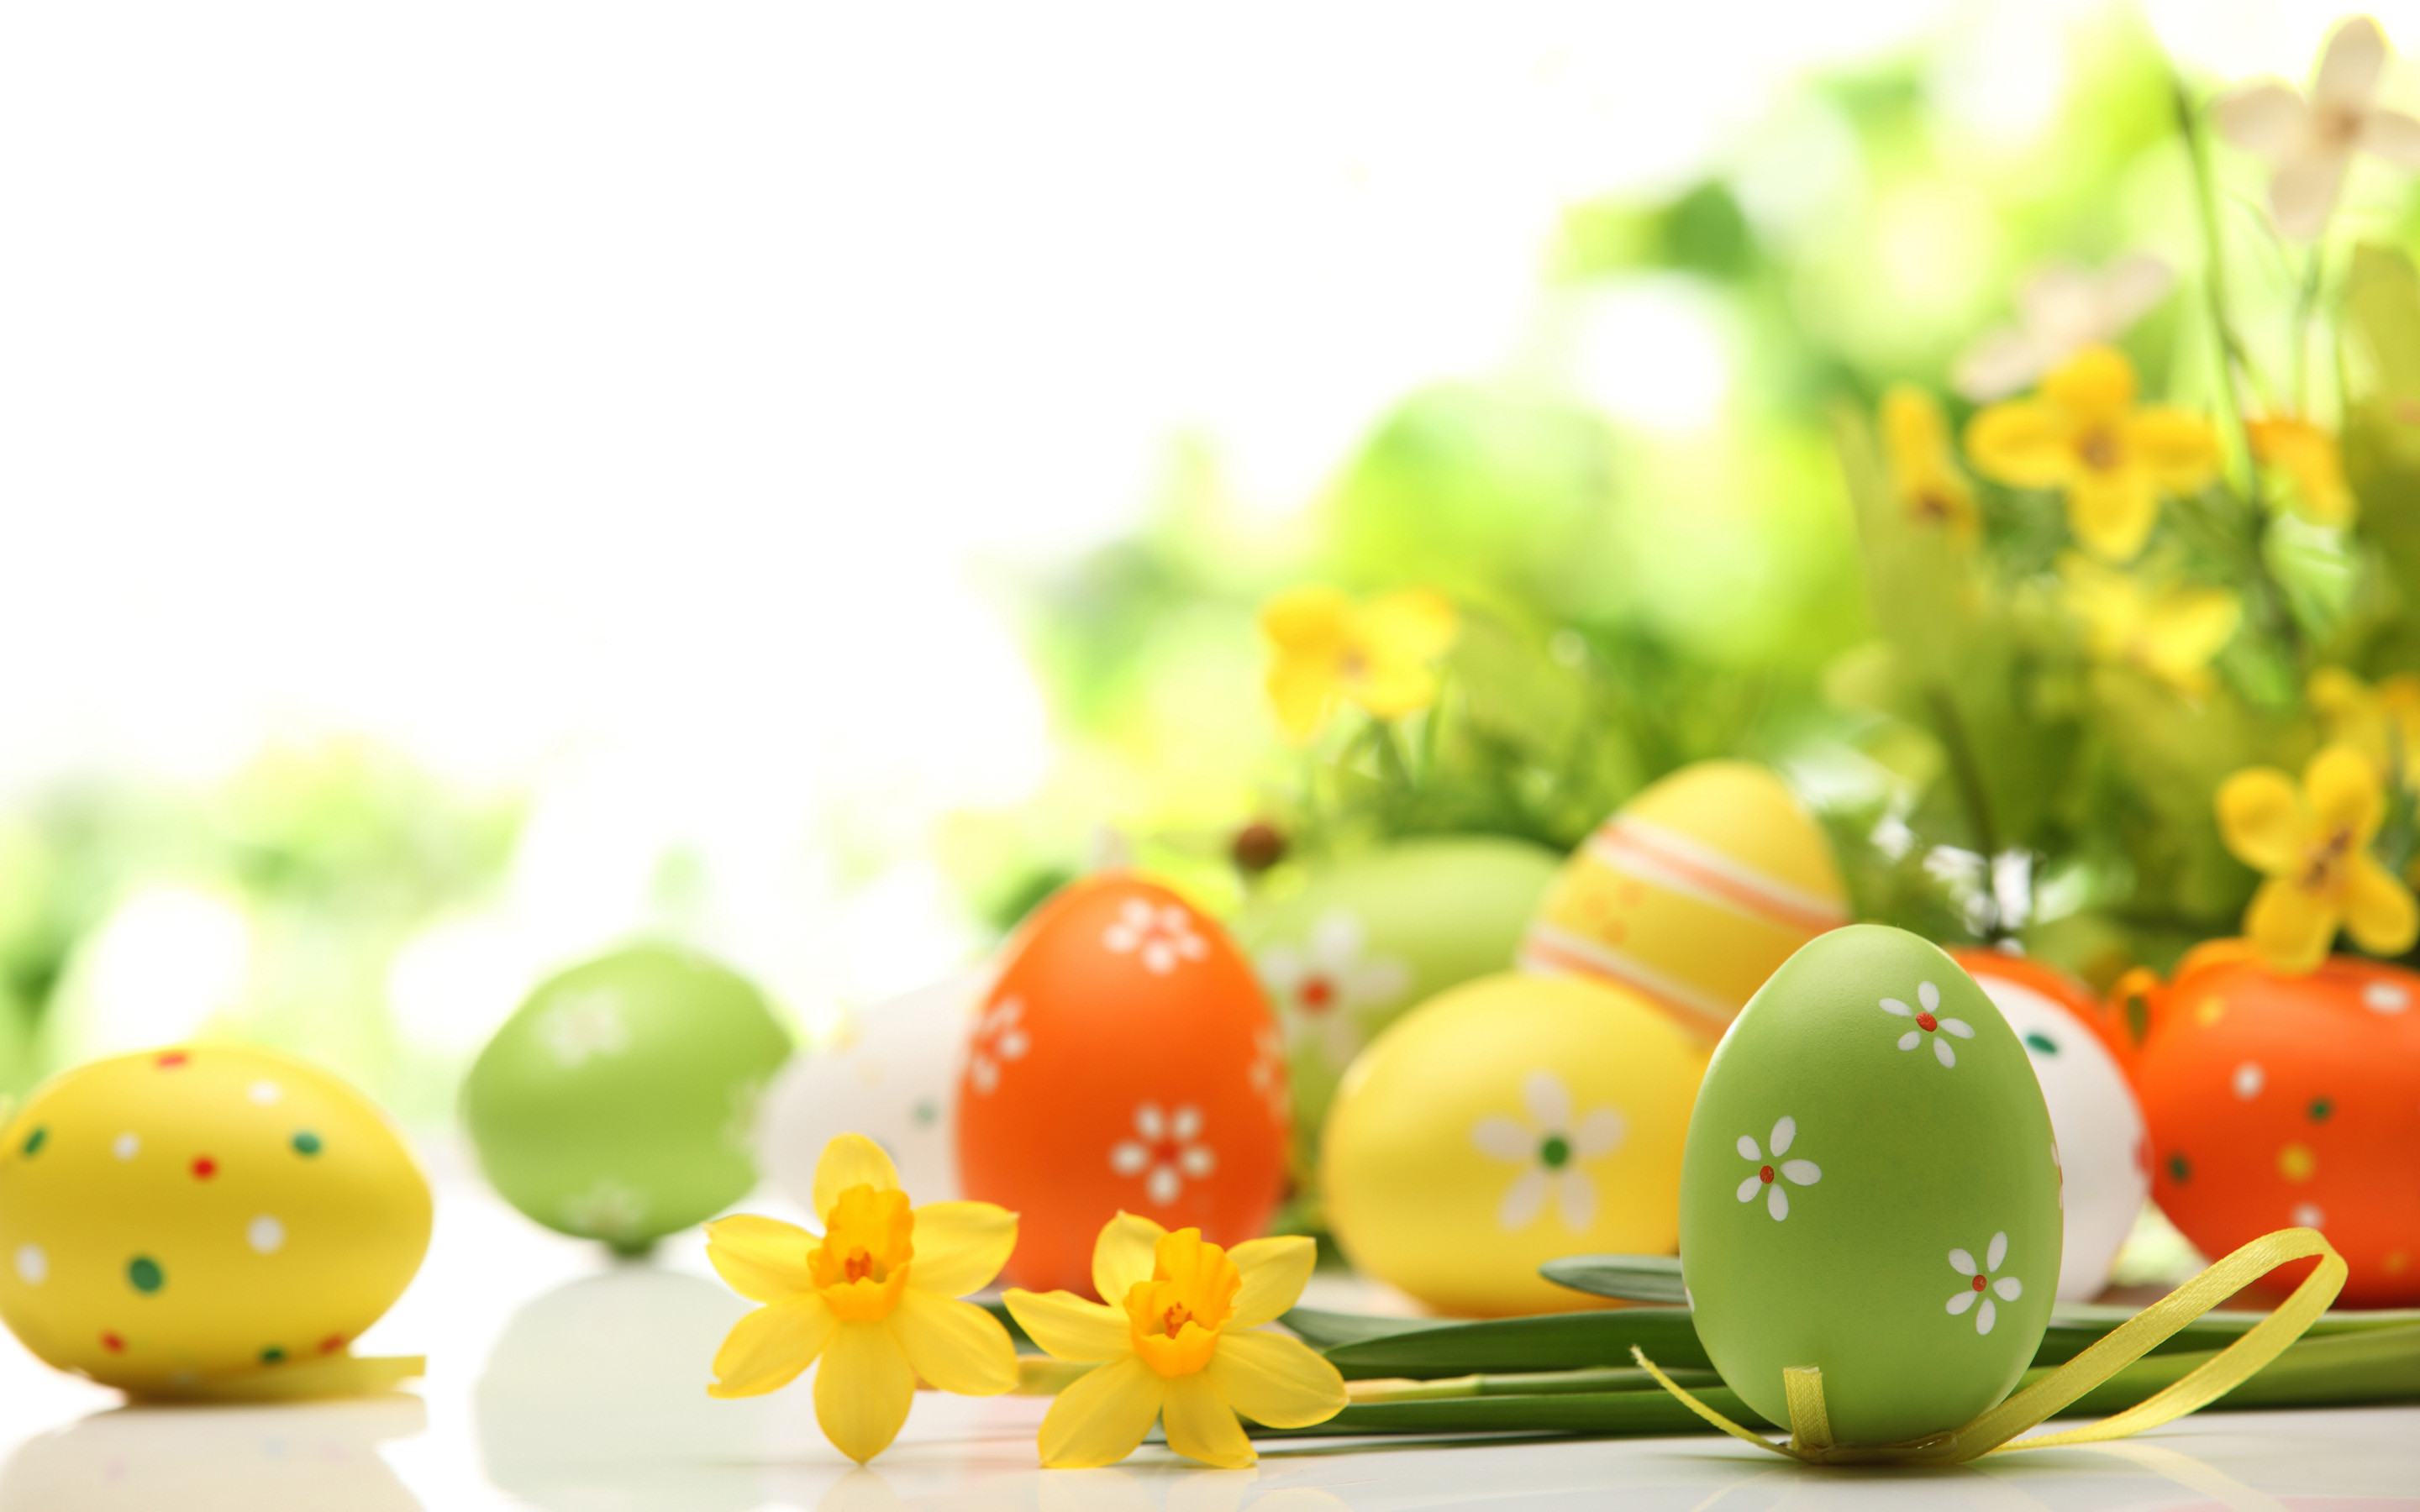 2880x1800 Cute Girly Desktop Wallpapers - Wallpapers Venue Spring and Easter wallpaper  | Backgrounds | Pinterest | Easter .